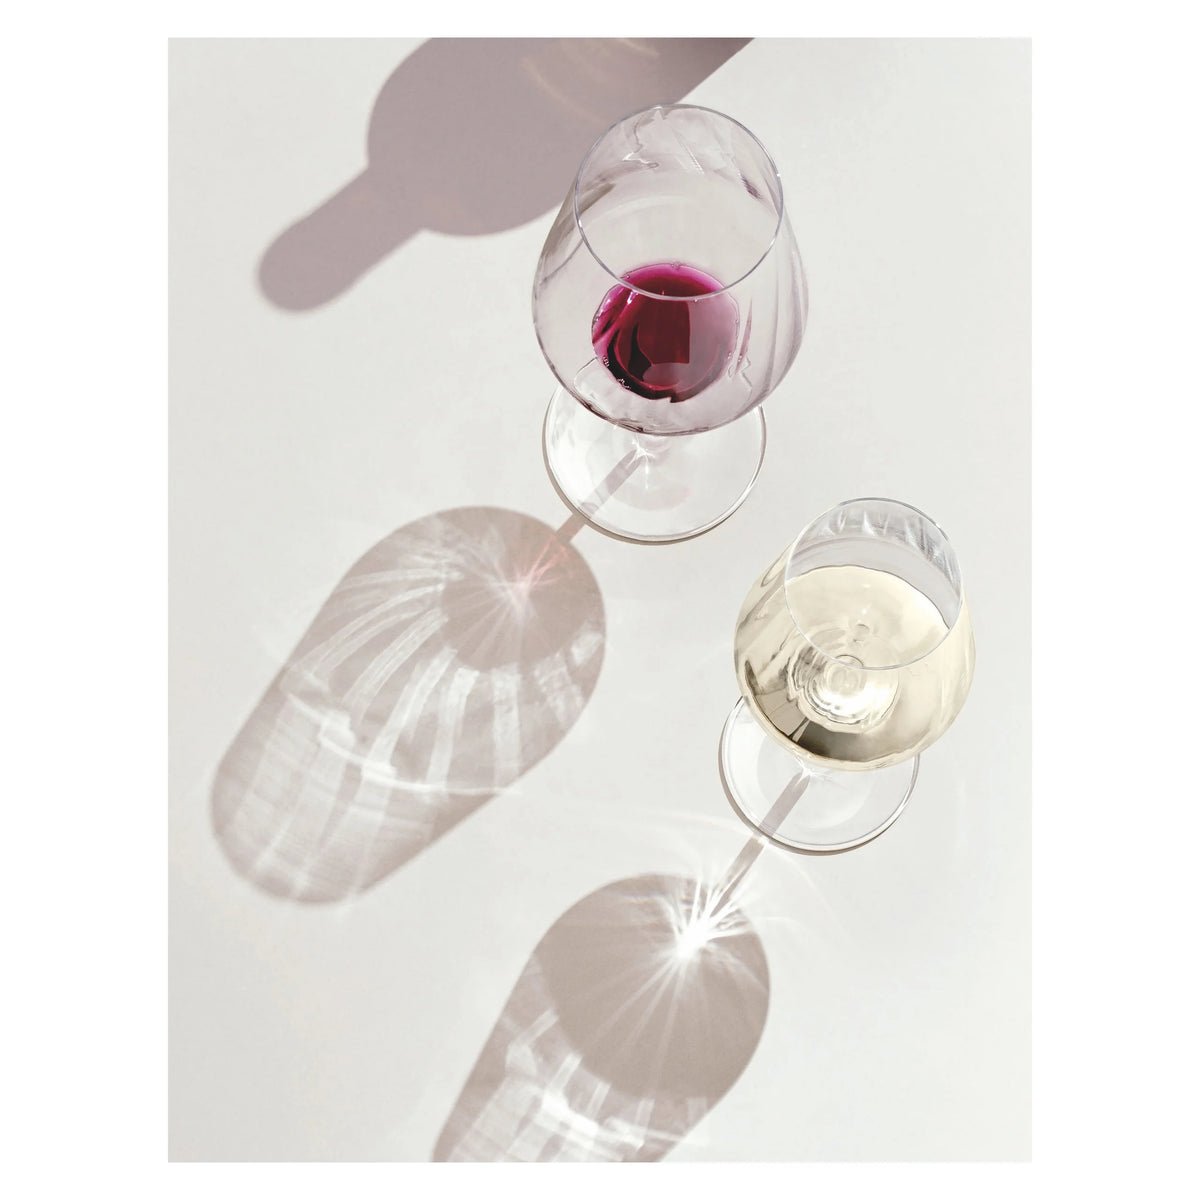 2 x Ritzenhoff &#39;Sternschliff&#39; Red Wine Glasses. Precision manufacturing &amp; detail: these glasses are elaborately worked with an internal relief structure.